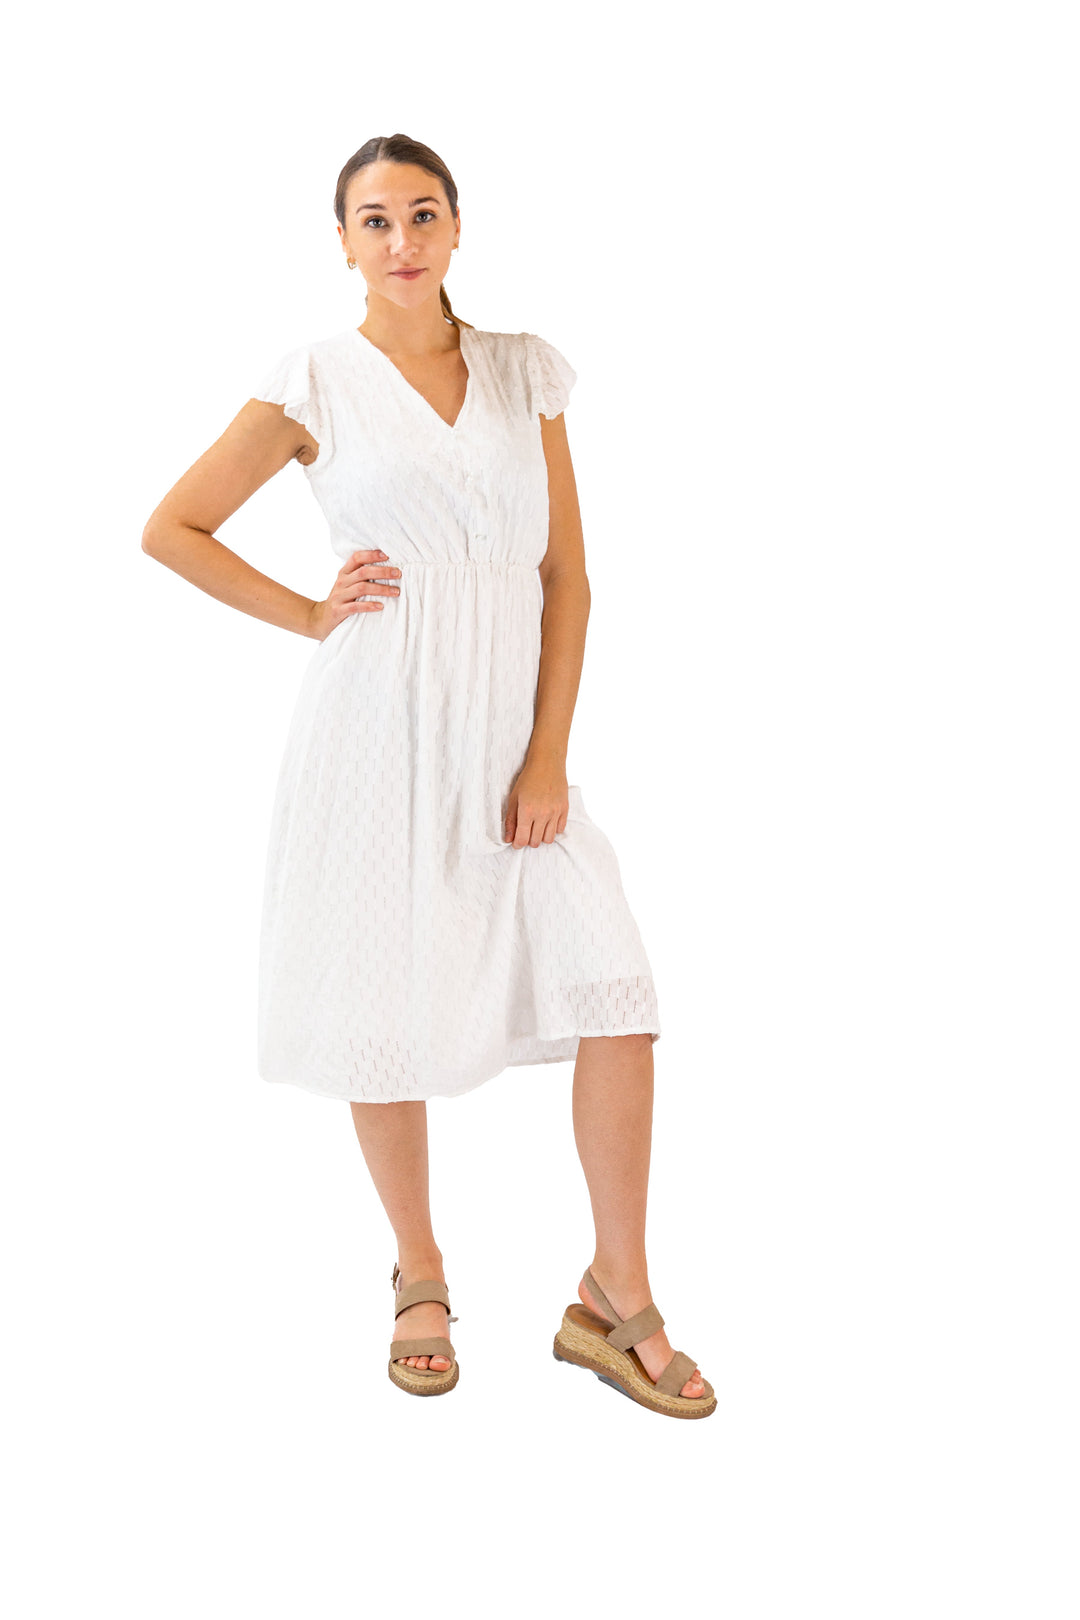 Fabonics Pristine Elegance White Midi Dress with Delicate Sleeves for Sophisticated Style